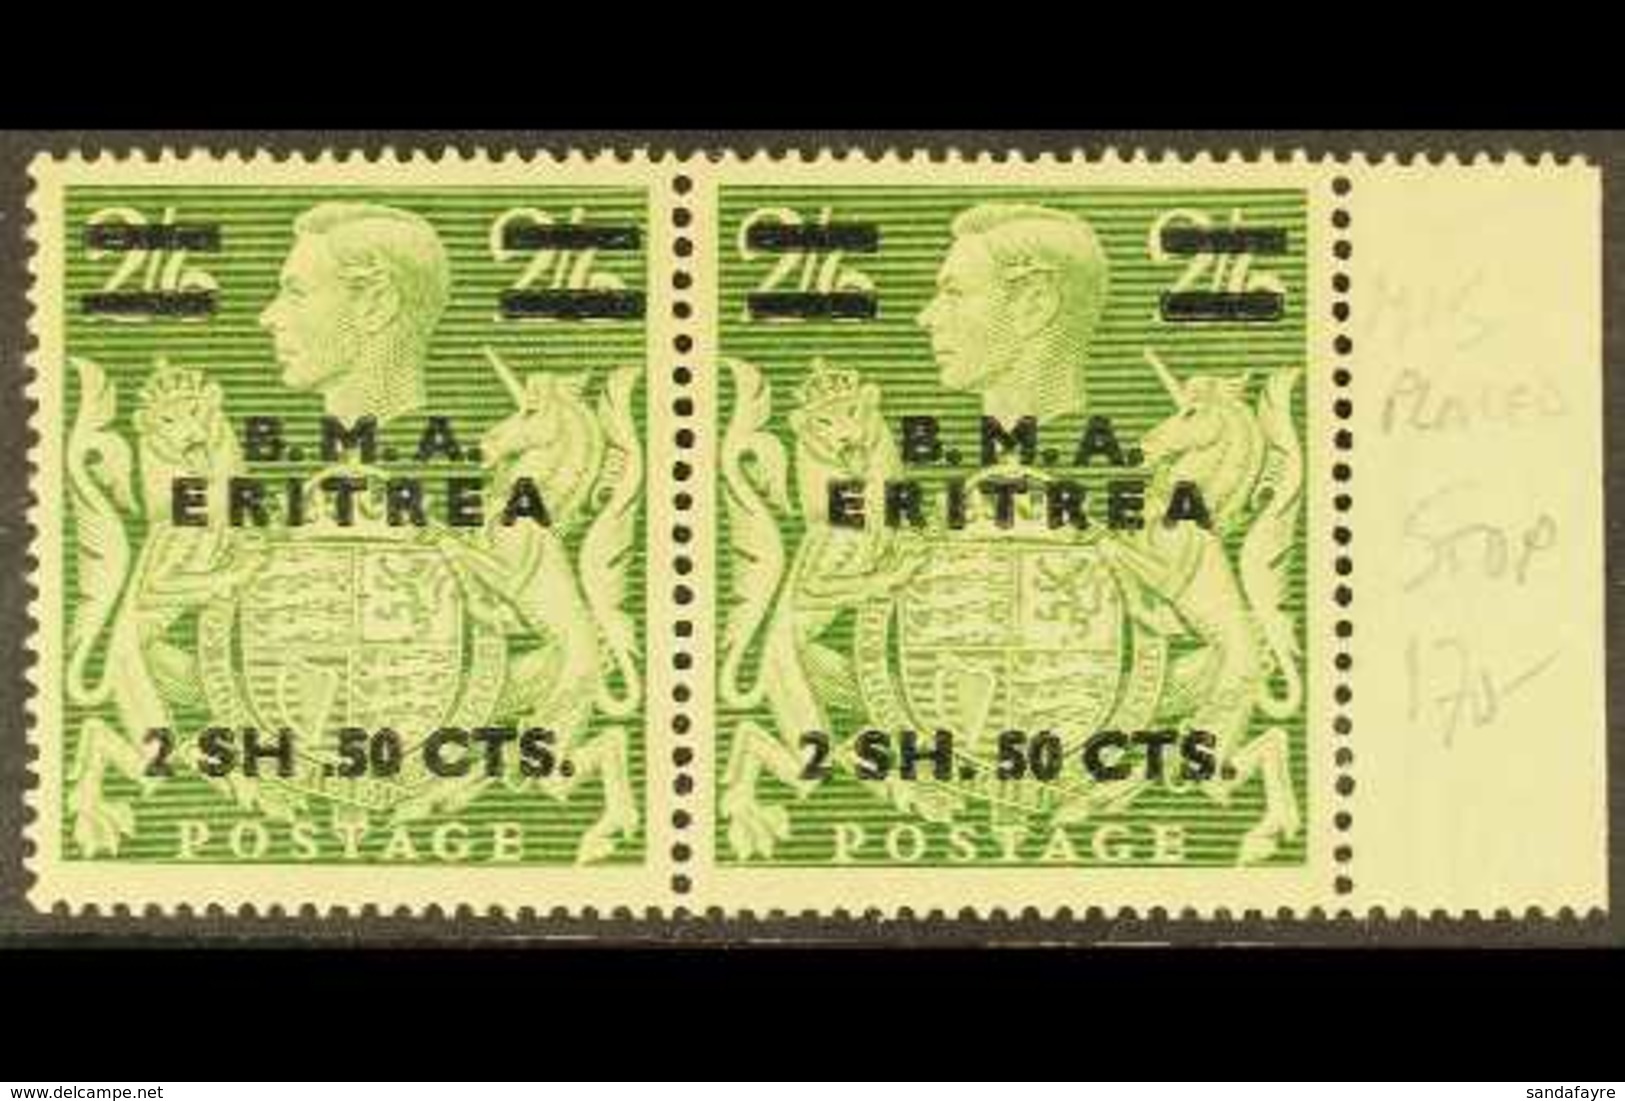 ERITREA 1948 2sh.50 On 2s 6d Yellow Green, Variety "misplaced Stop", SG E10a, In Pair With Normal, Superb Never Hinged M - Italiaans Oost-Afrika